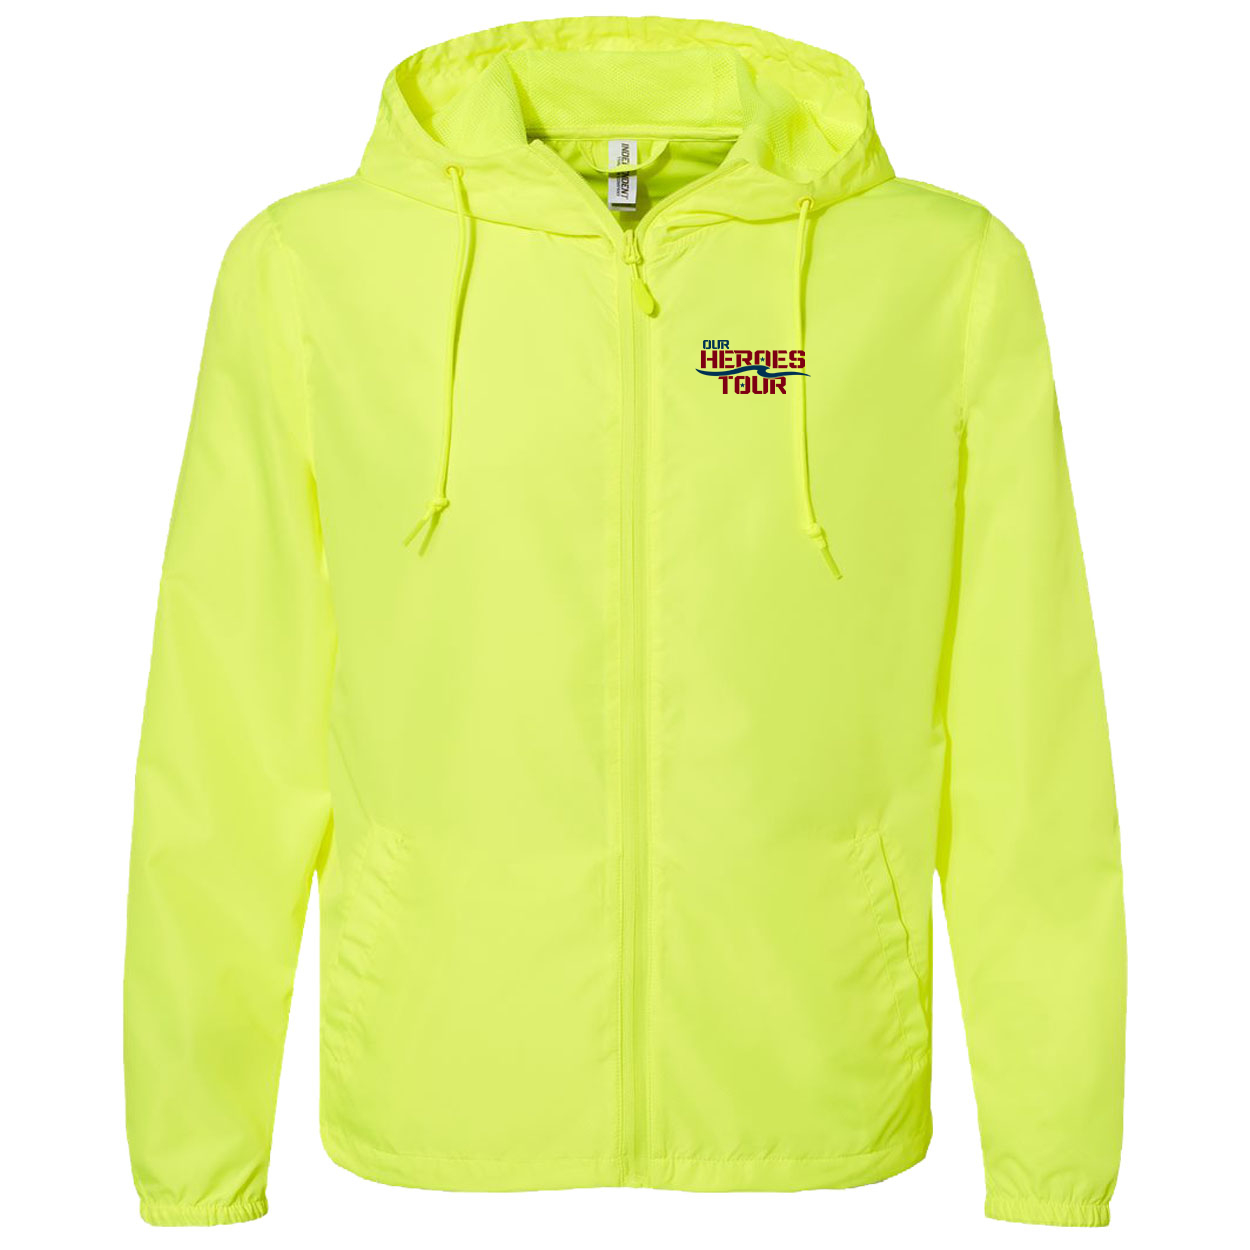 Our Heroes Tour Night Out Lightweight Windbreaker Safety Yellow